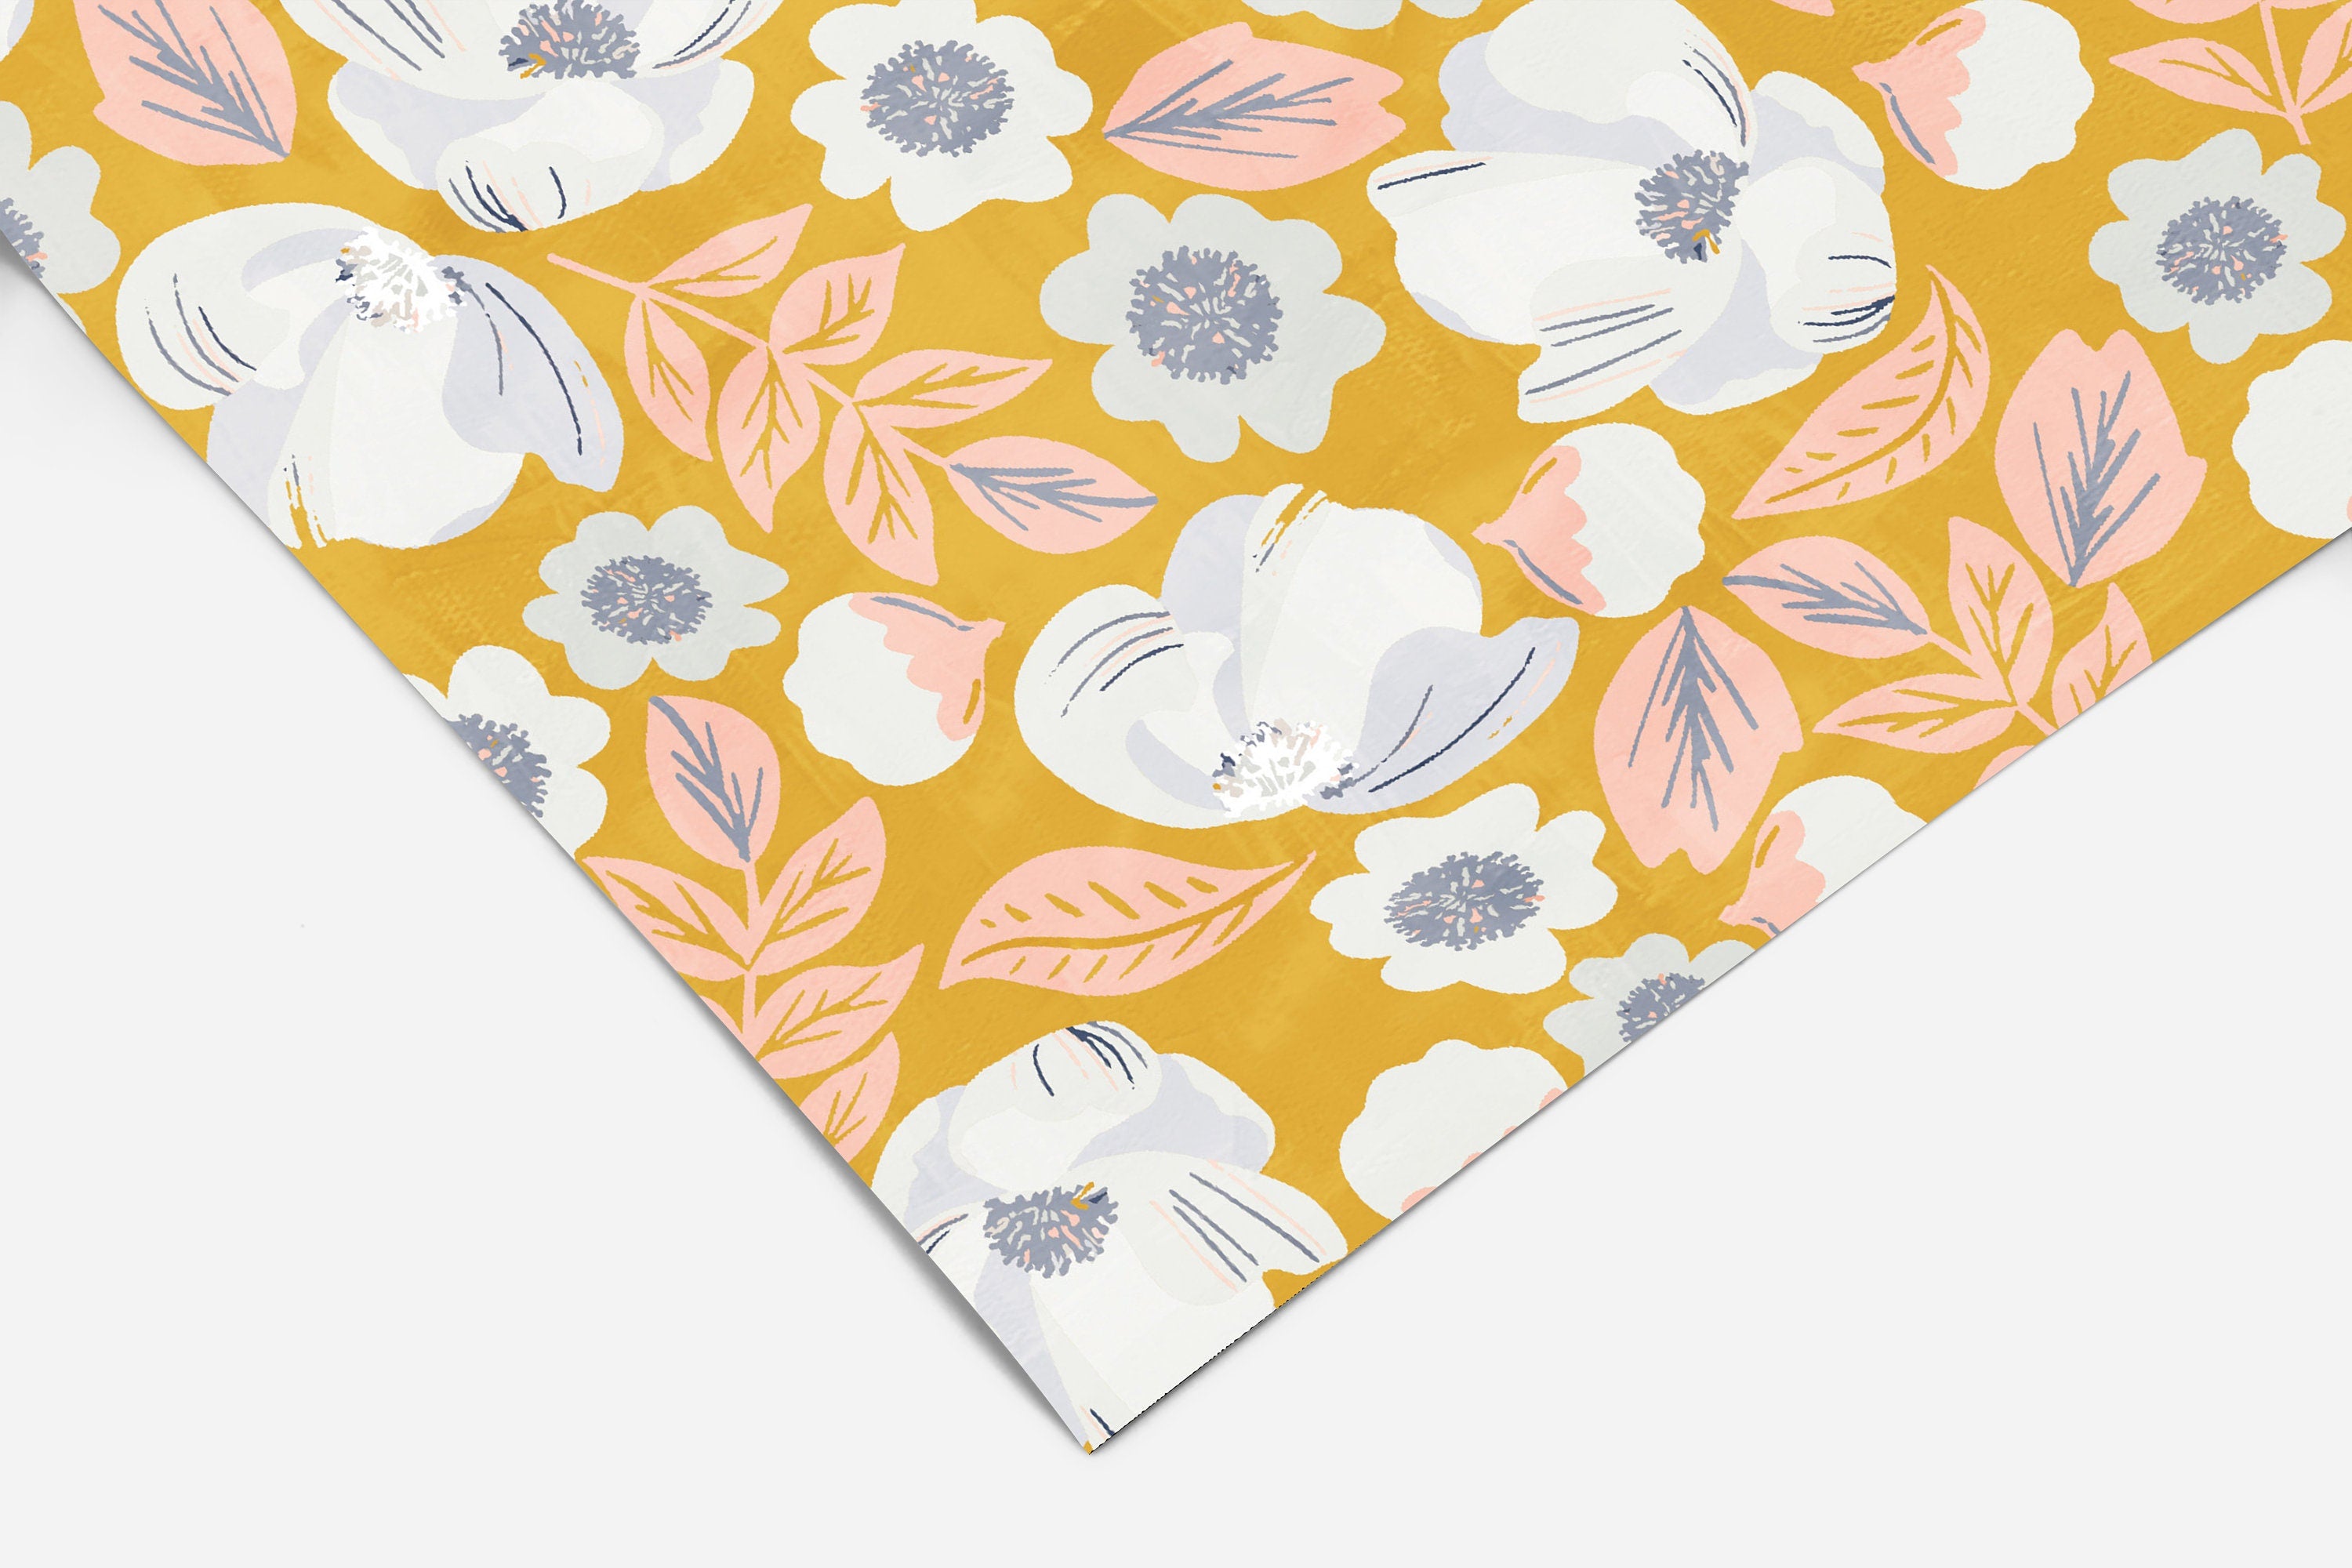 Yellow White Floral Wallpaper | Removable Wallpaper | Peel And Stick Wallpaper | Adhesive Wallpaper | Wall Paper Peel Stick Wall Mural 2305 - JamesAndColors